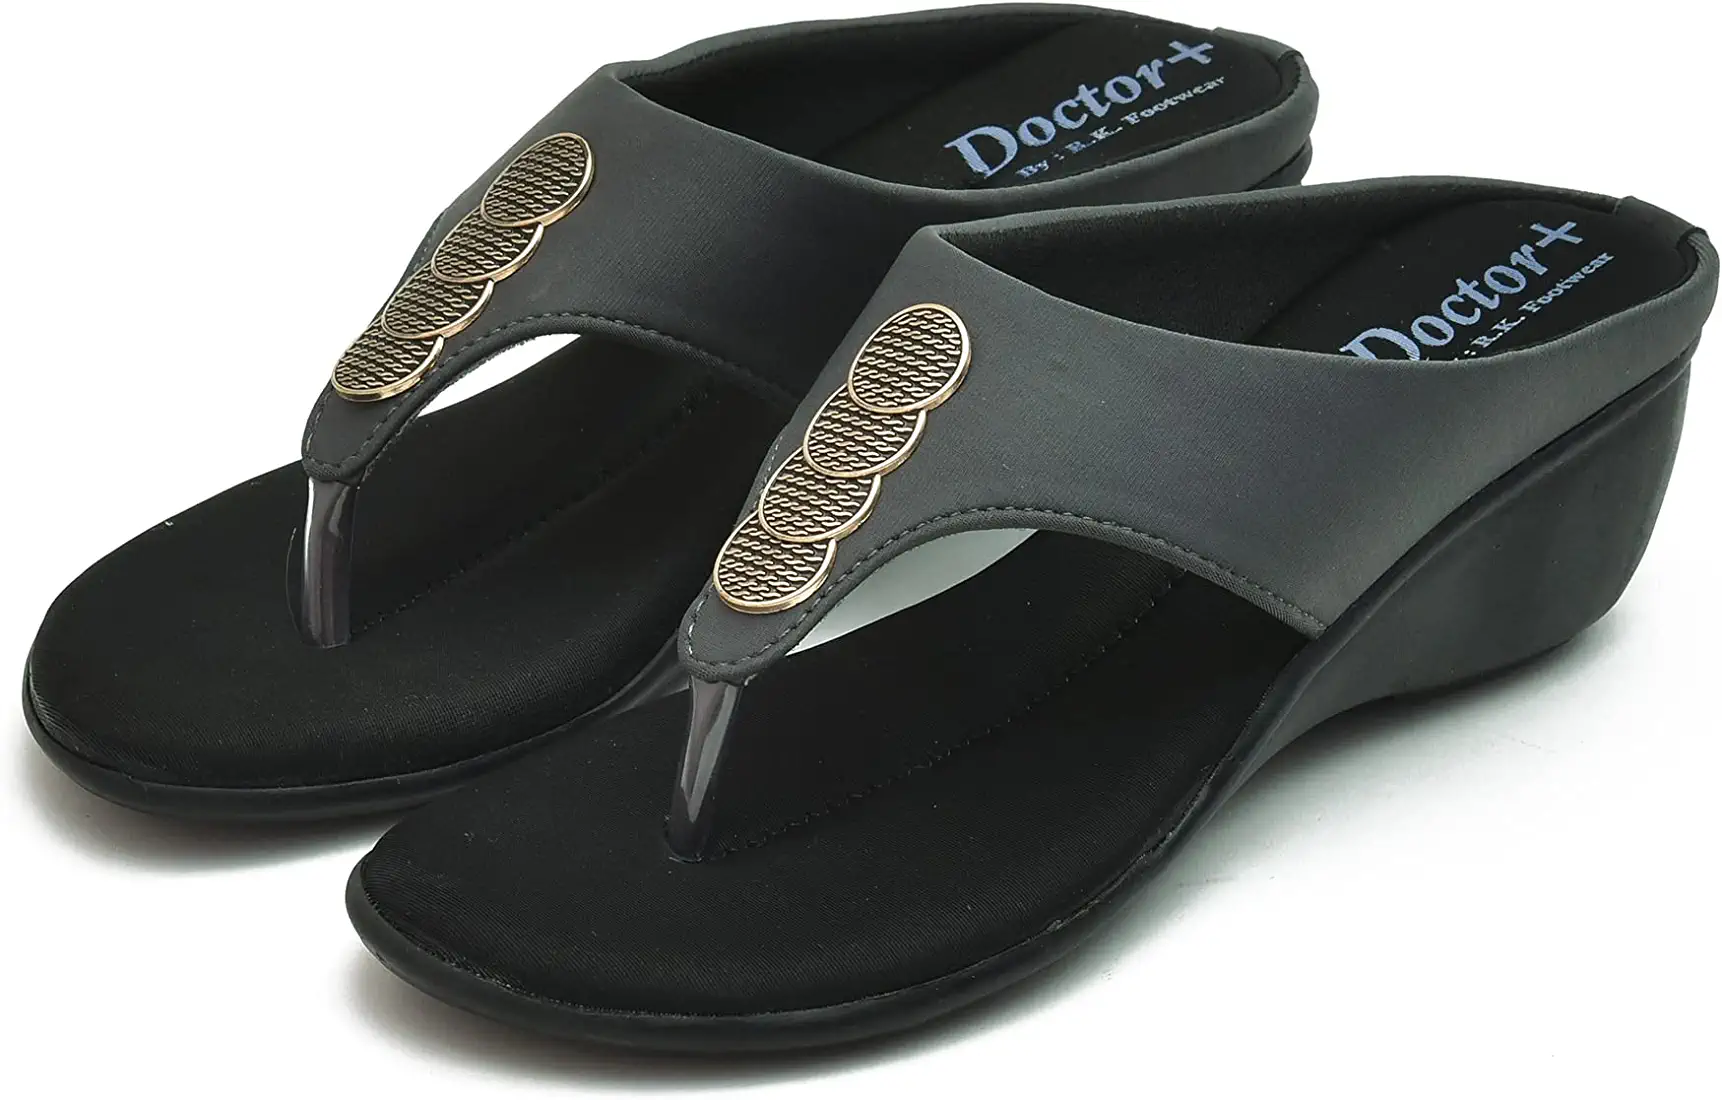 Private: MAYA'S CHOICE Women's Fashion Flip Flops Sliper | Doctor Ortho Comfortable Chappal for Women & Girls | Light weight, Soft Footbed, Comfortable & Stylish